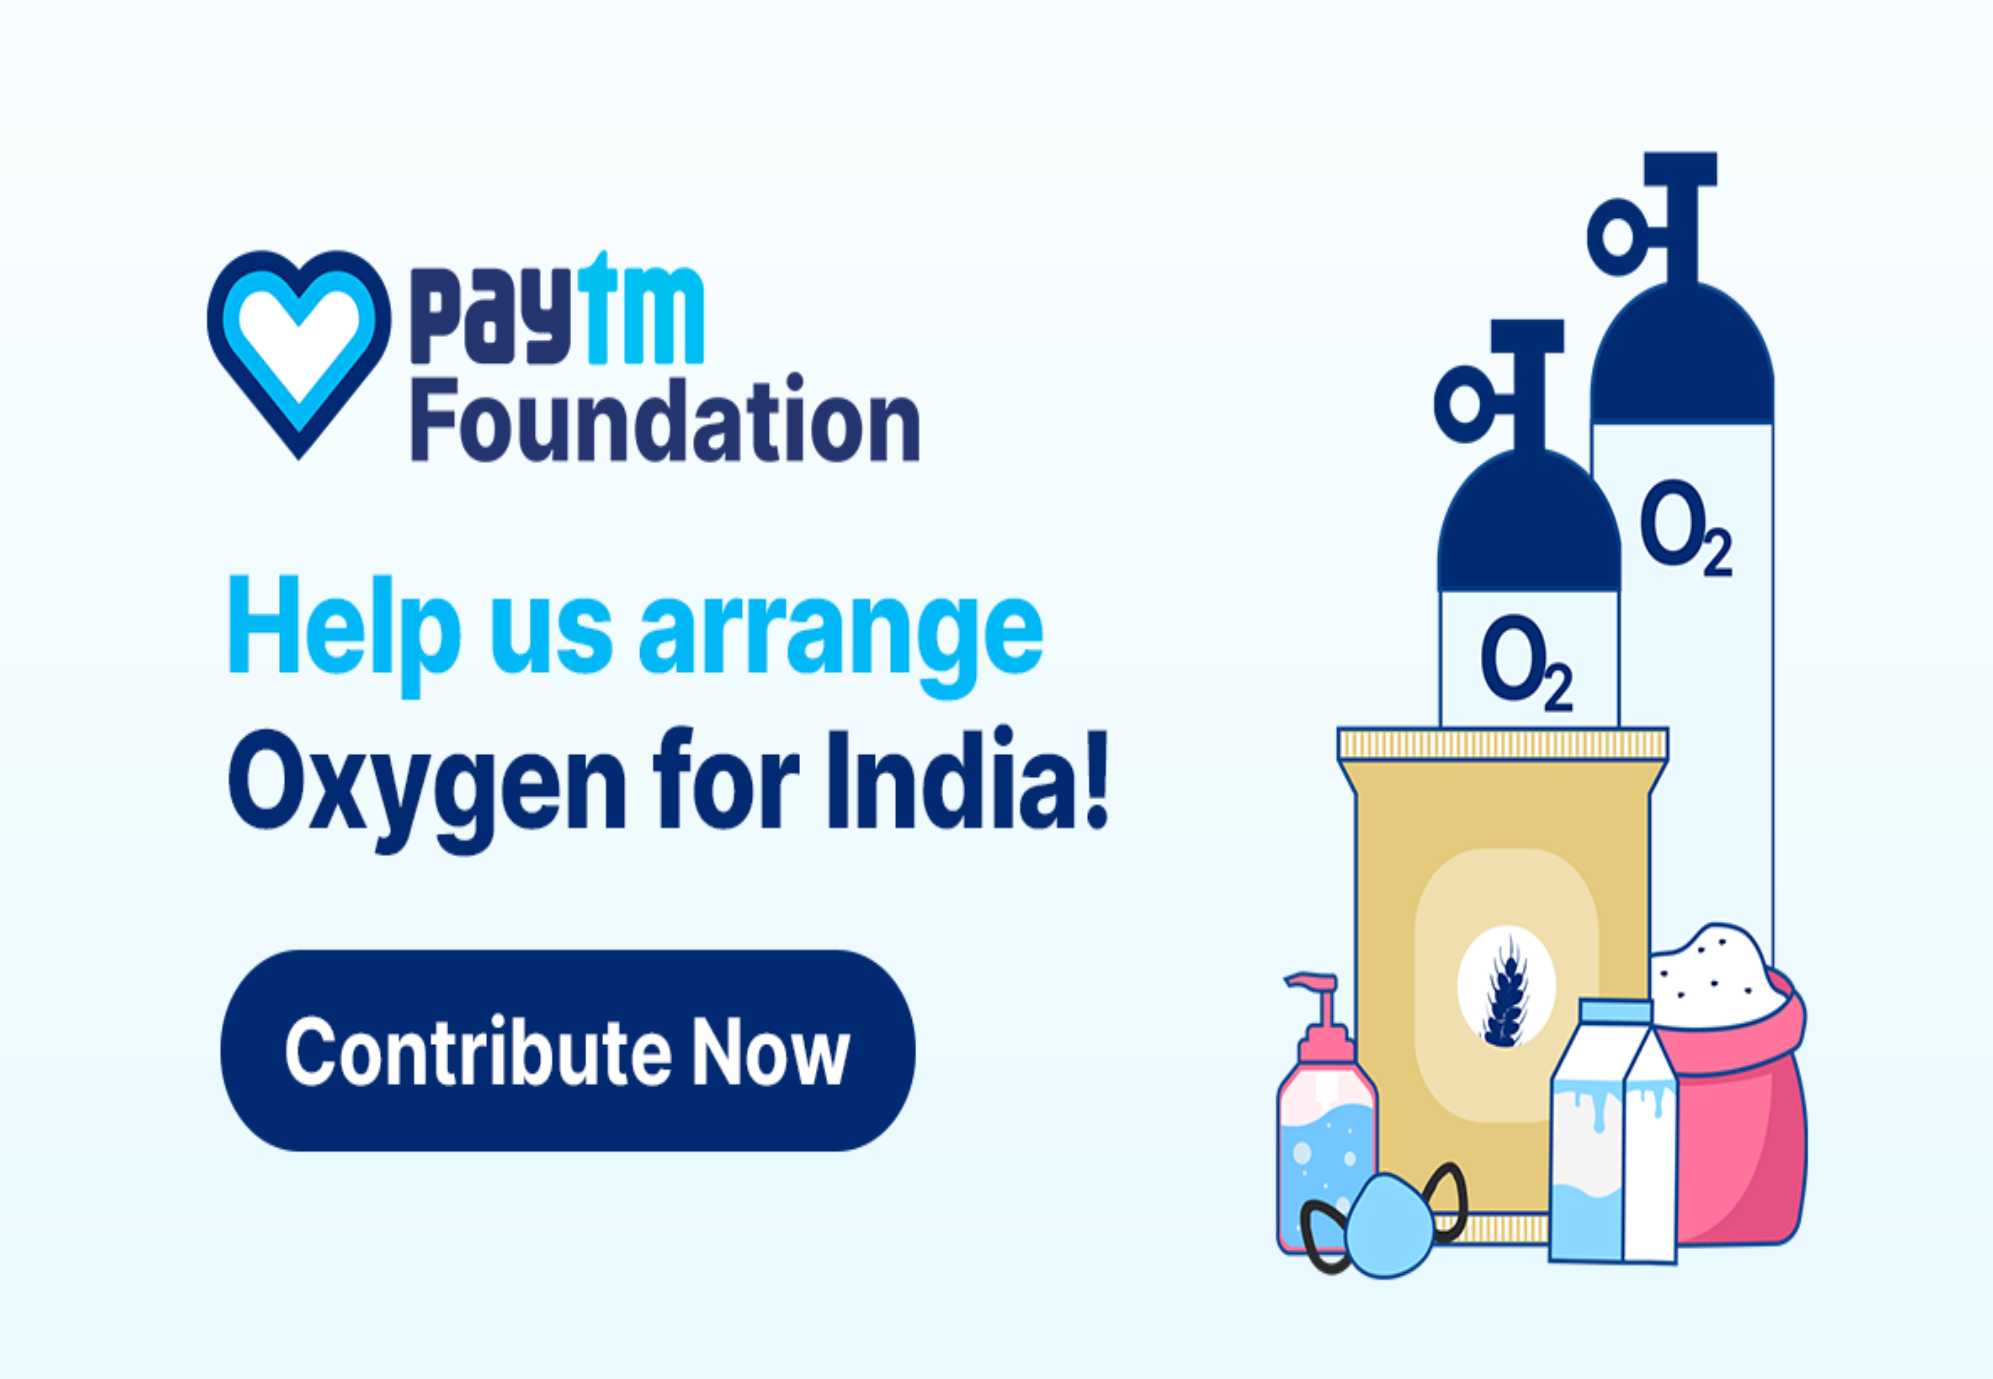 Paytm to set up Oxygen Plants for long-term sustainable supply across India